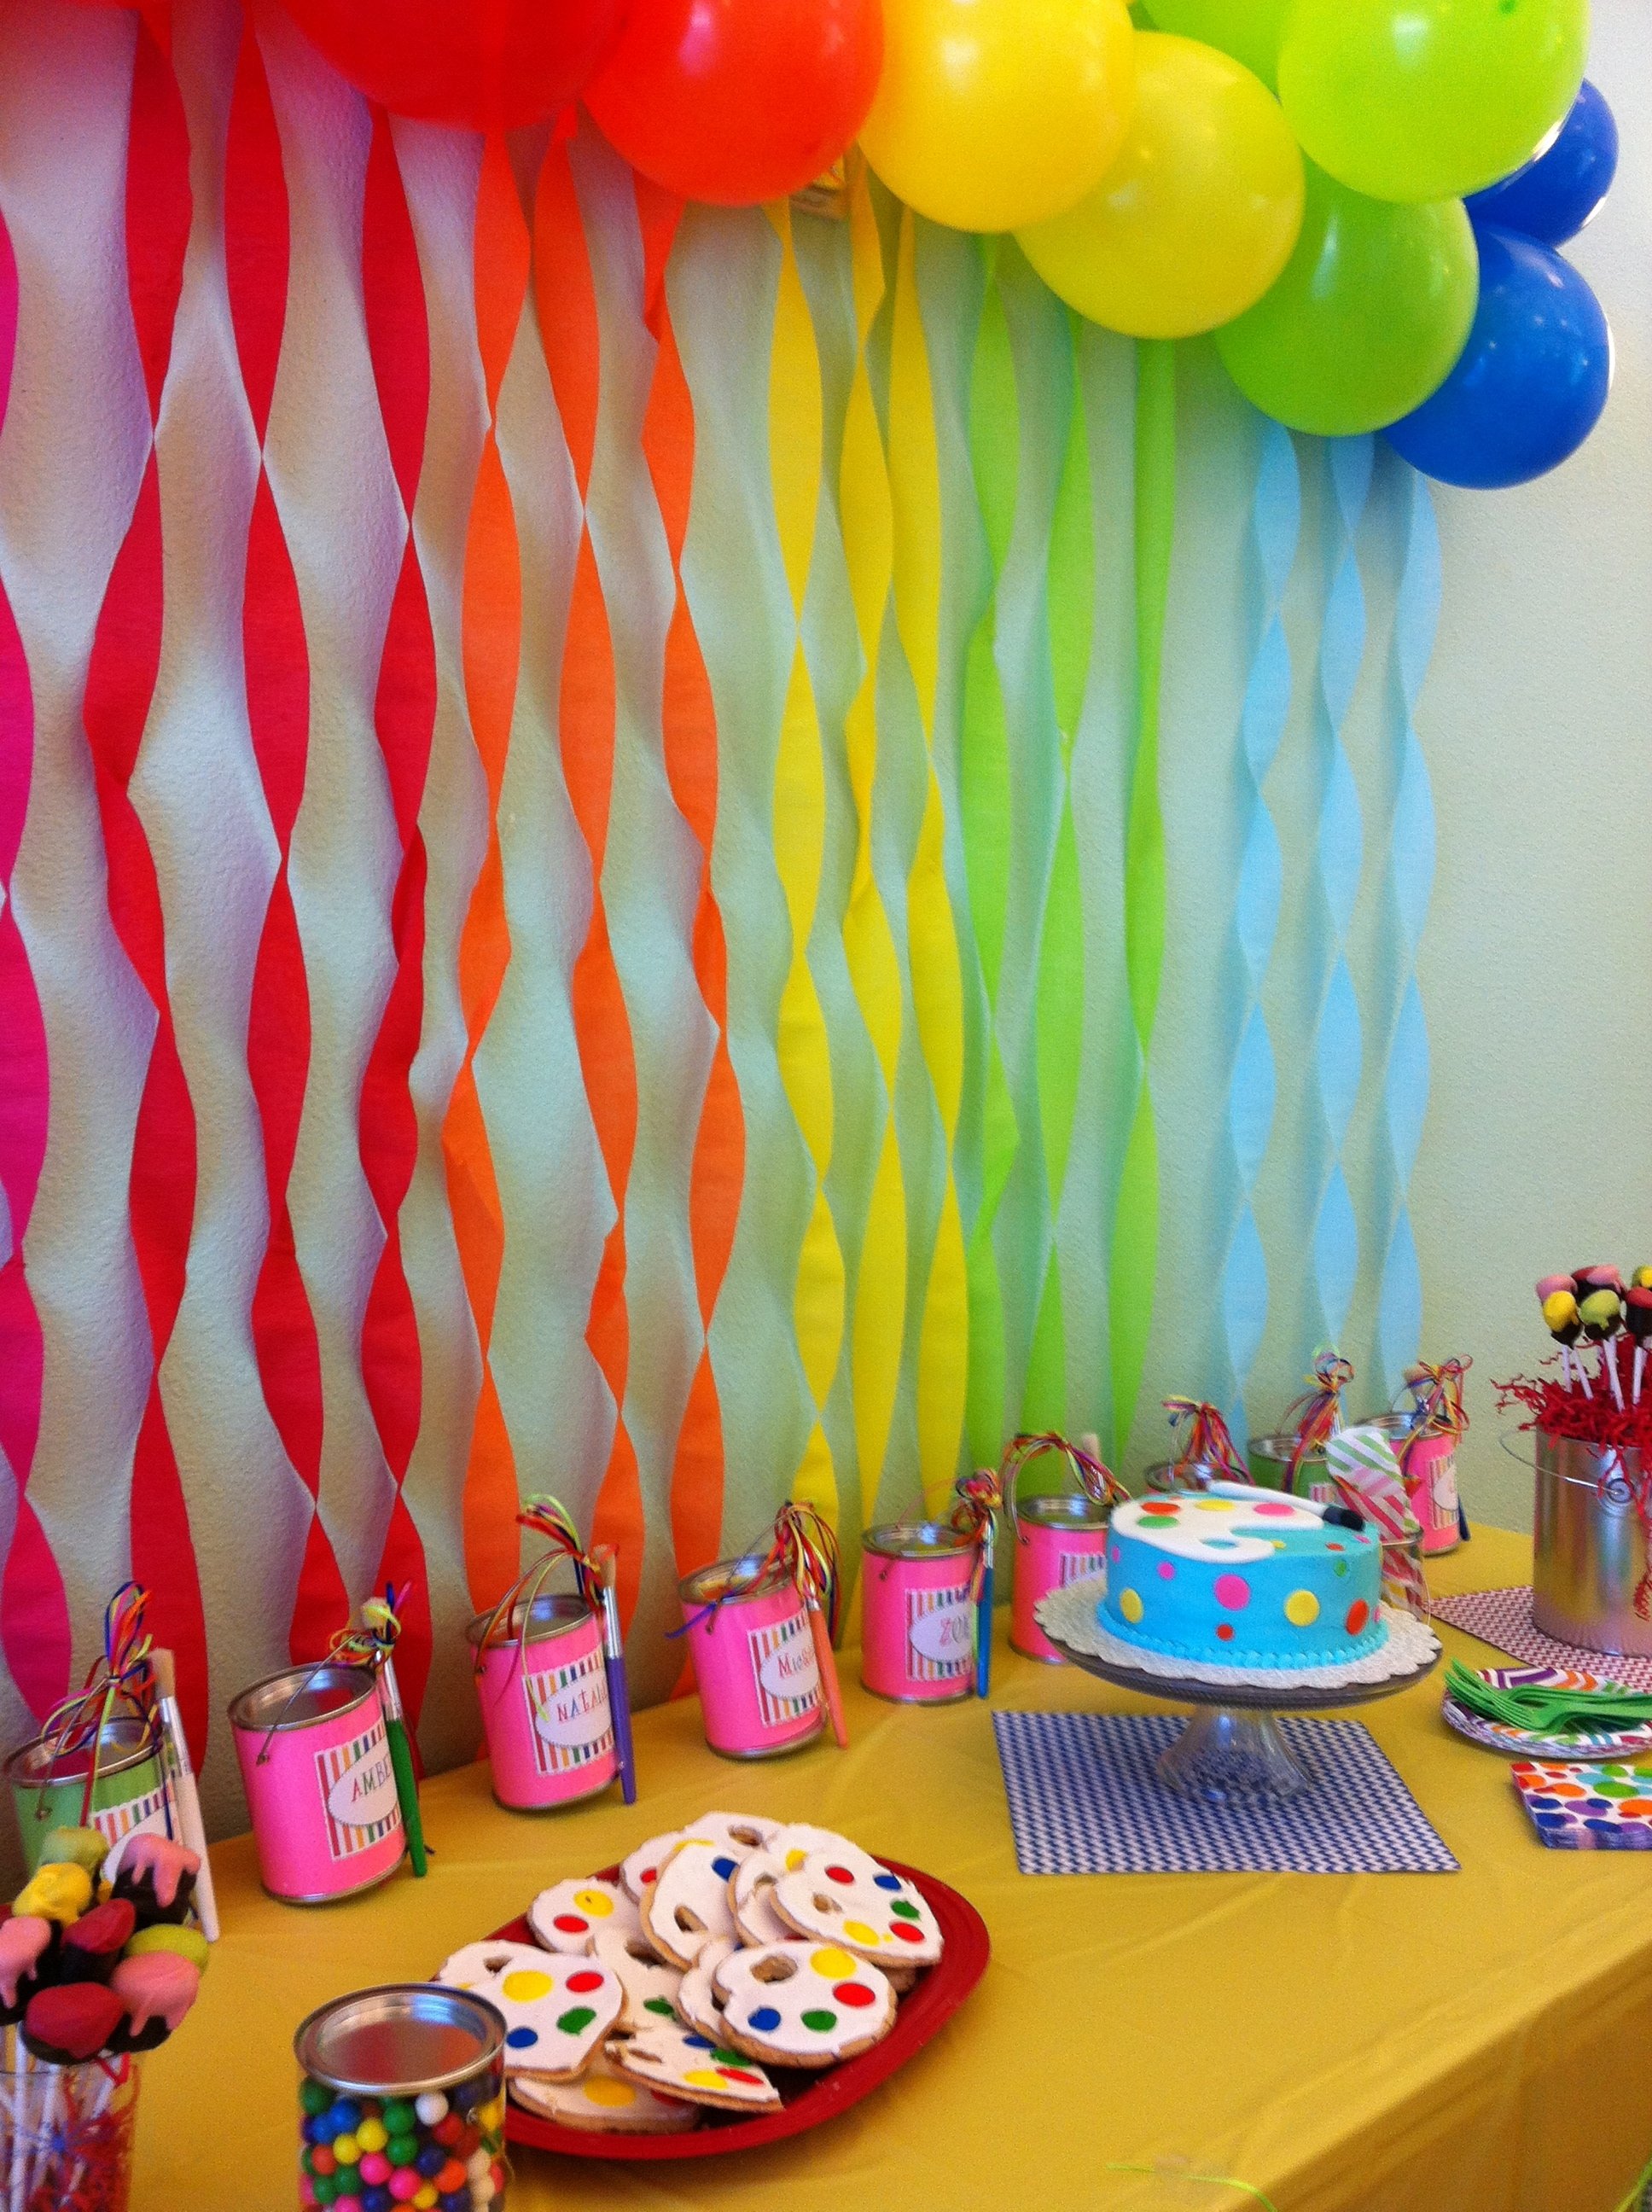 10 Best Birthday Party Ideas For A 12 Year Old Girl most birthday party ideas for 7 year old boy at home 8 girl art 2022